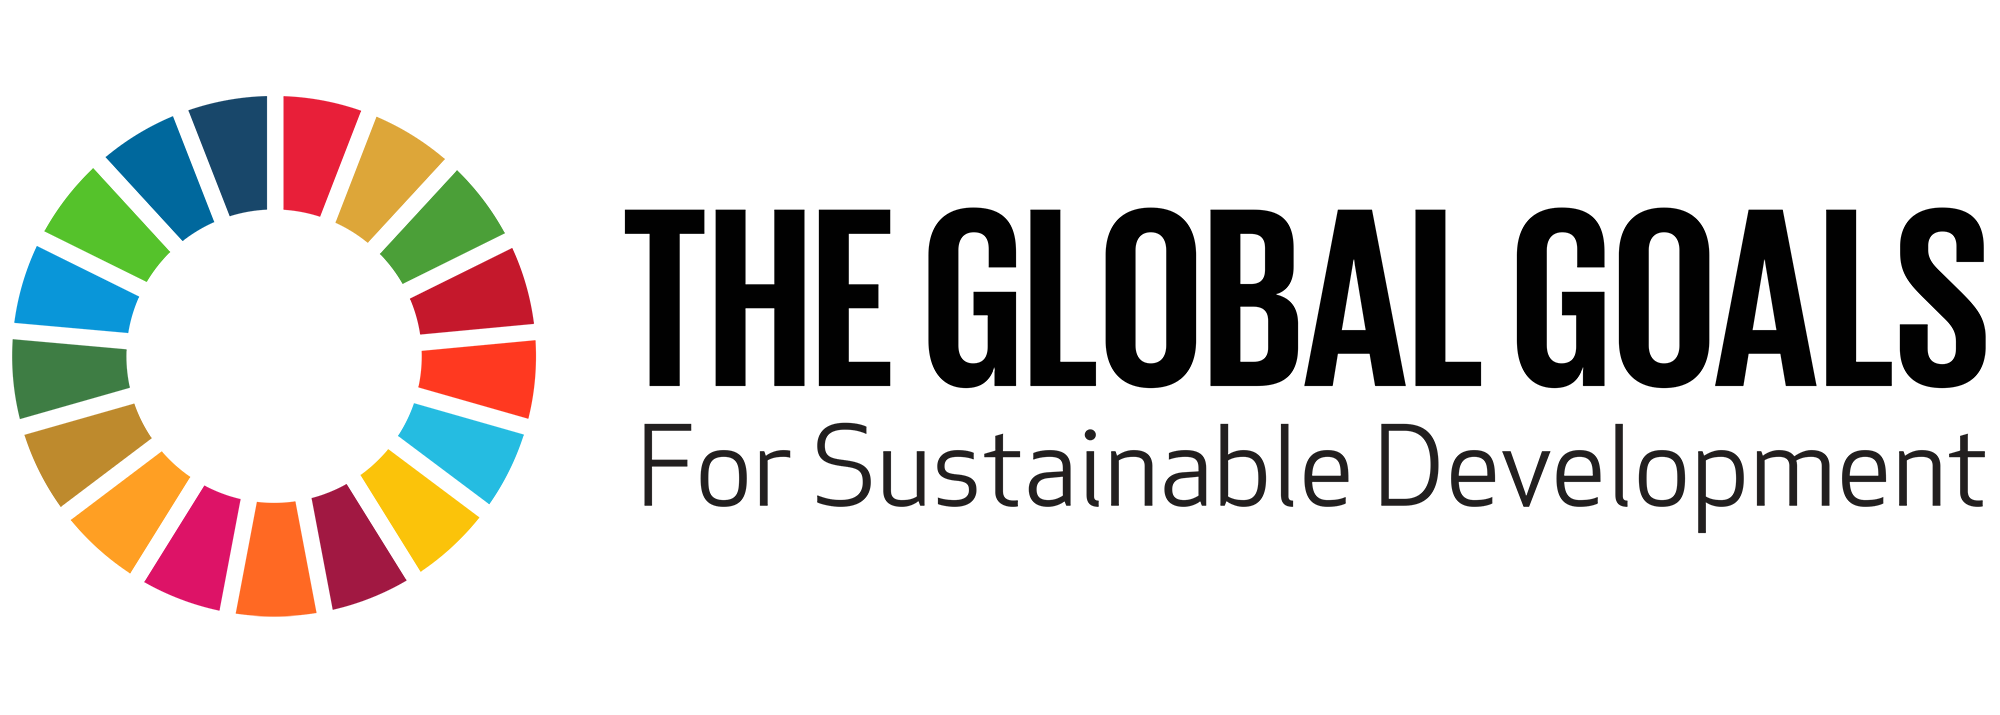 The Global Goals for Sustainable Development logo